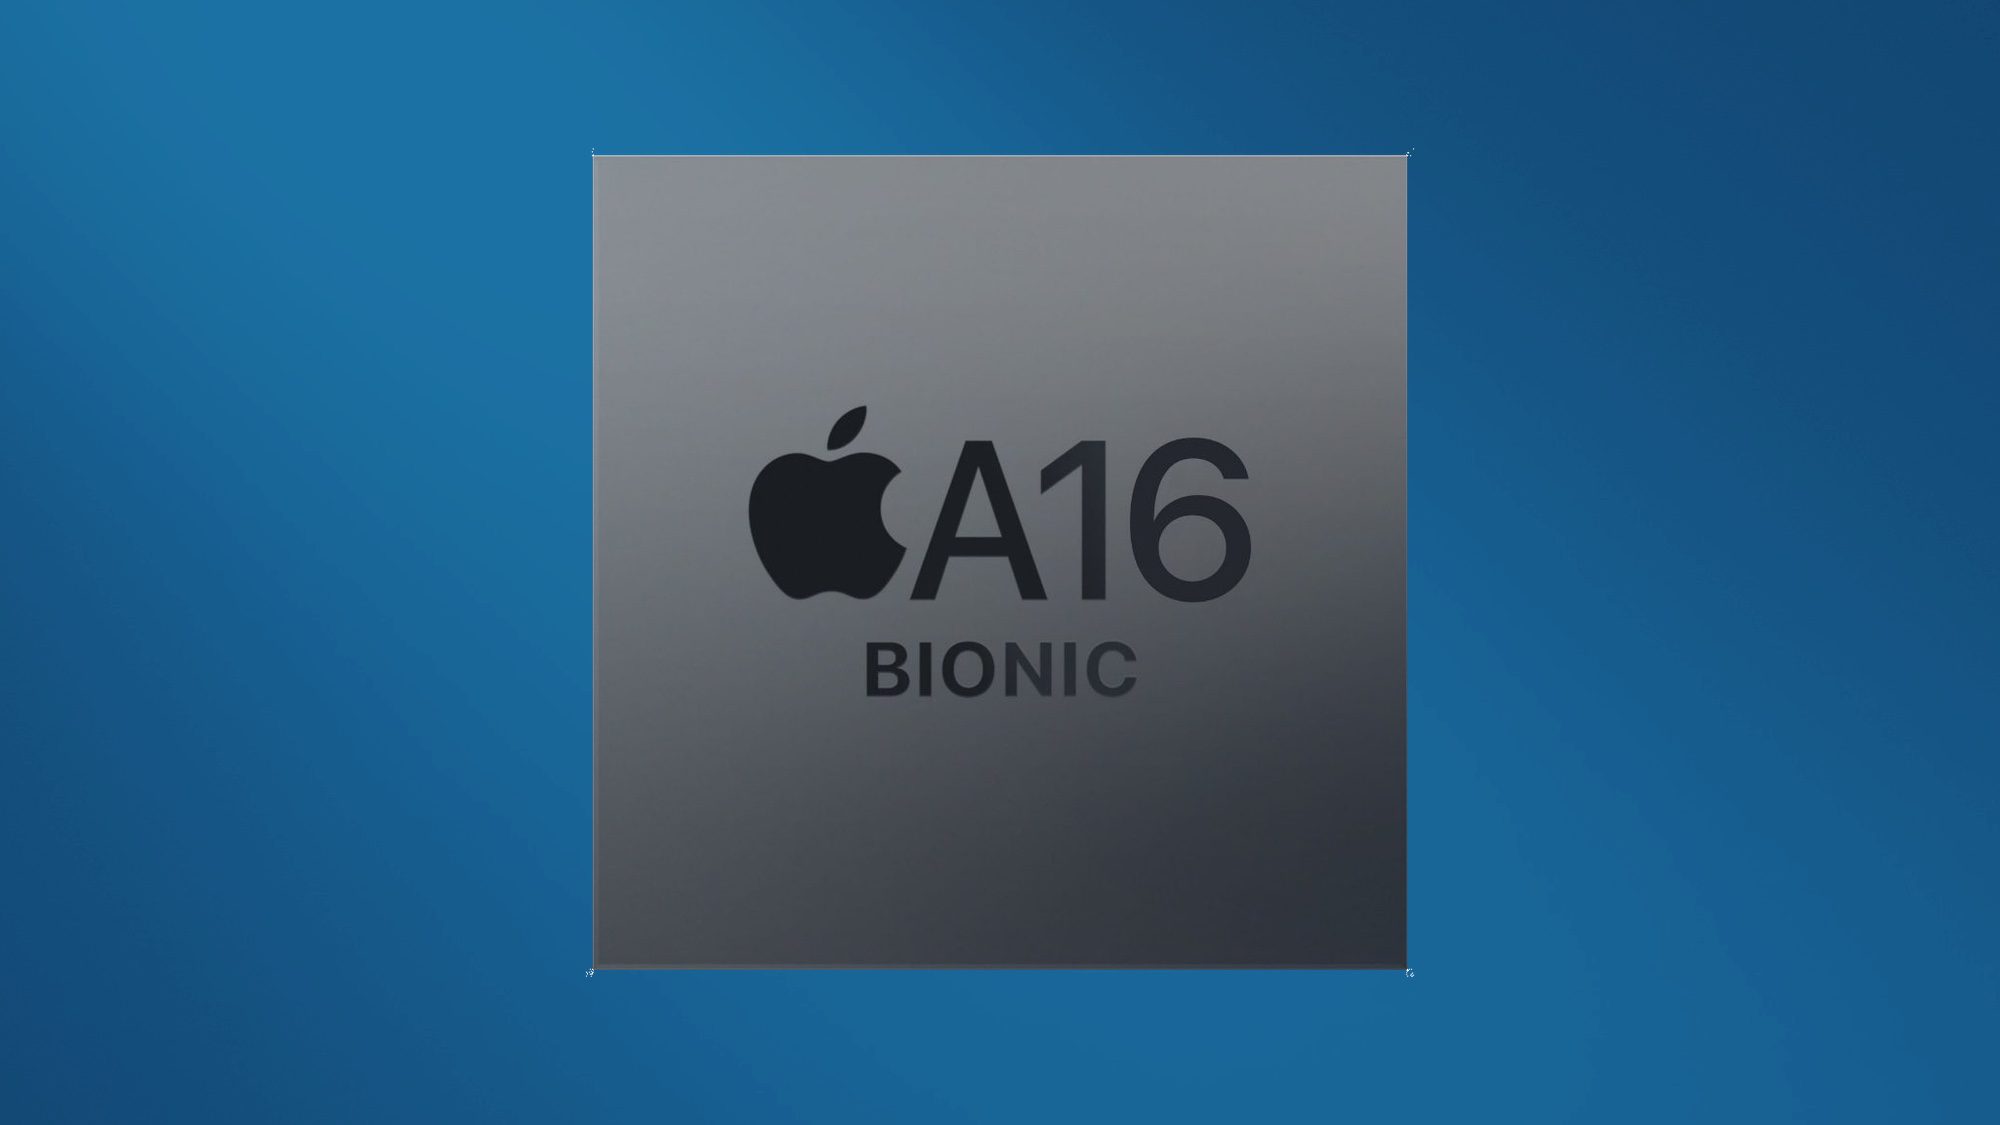 Introducing the A16 Bionic chipset